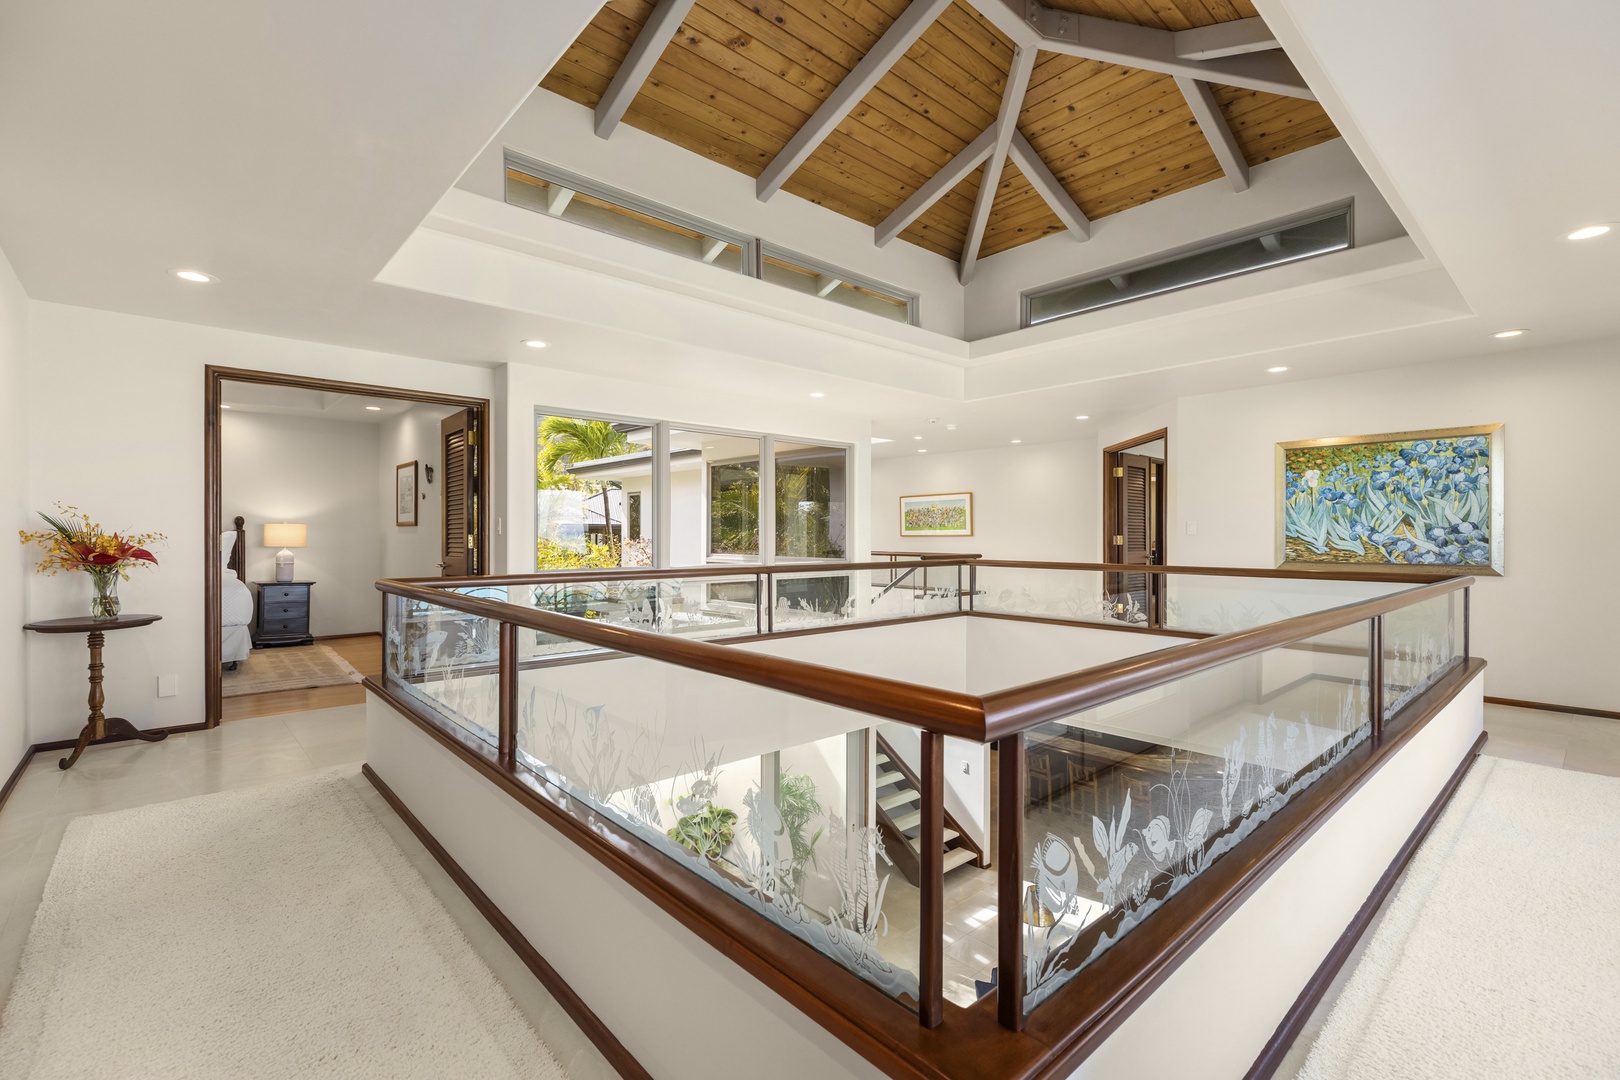 Kailua Vacation Rentals, Mokulua Sunrise - Venture upstairs to the open landing, complete with overhead views of the main living area and amazing views of the beach through the sliding glass doors